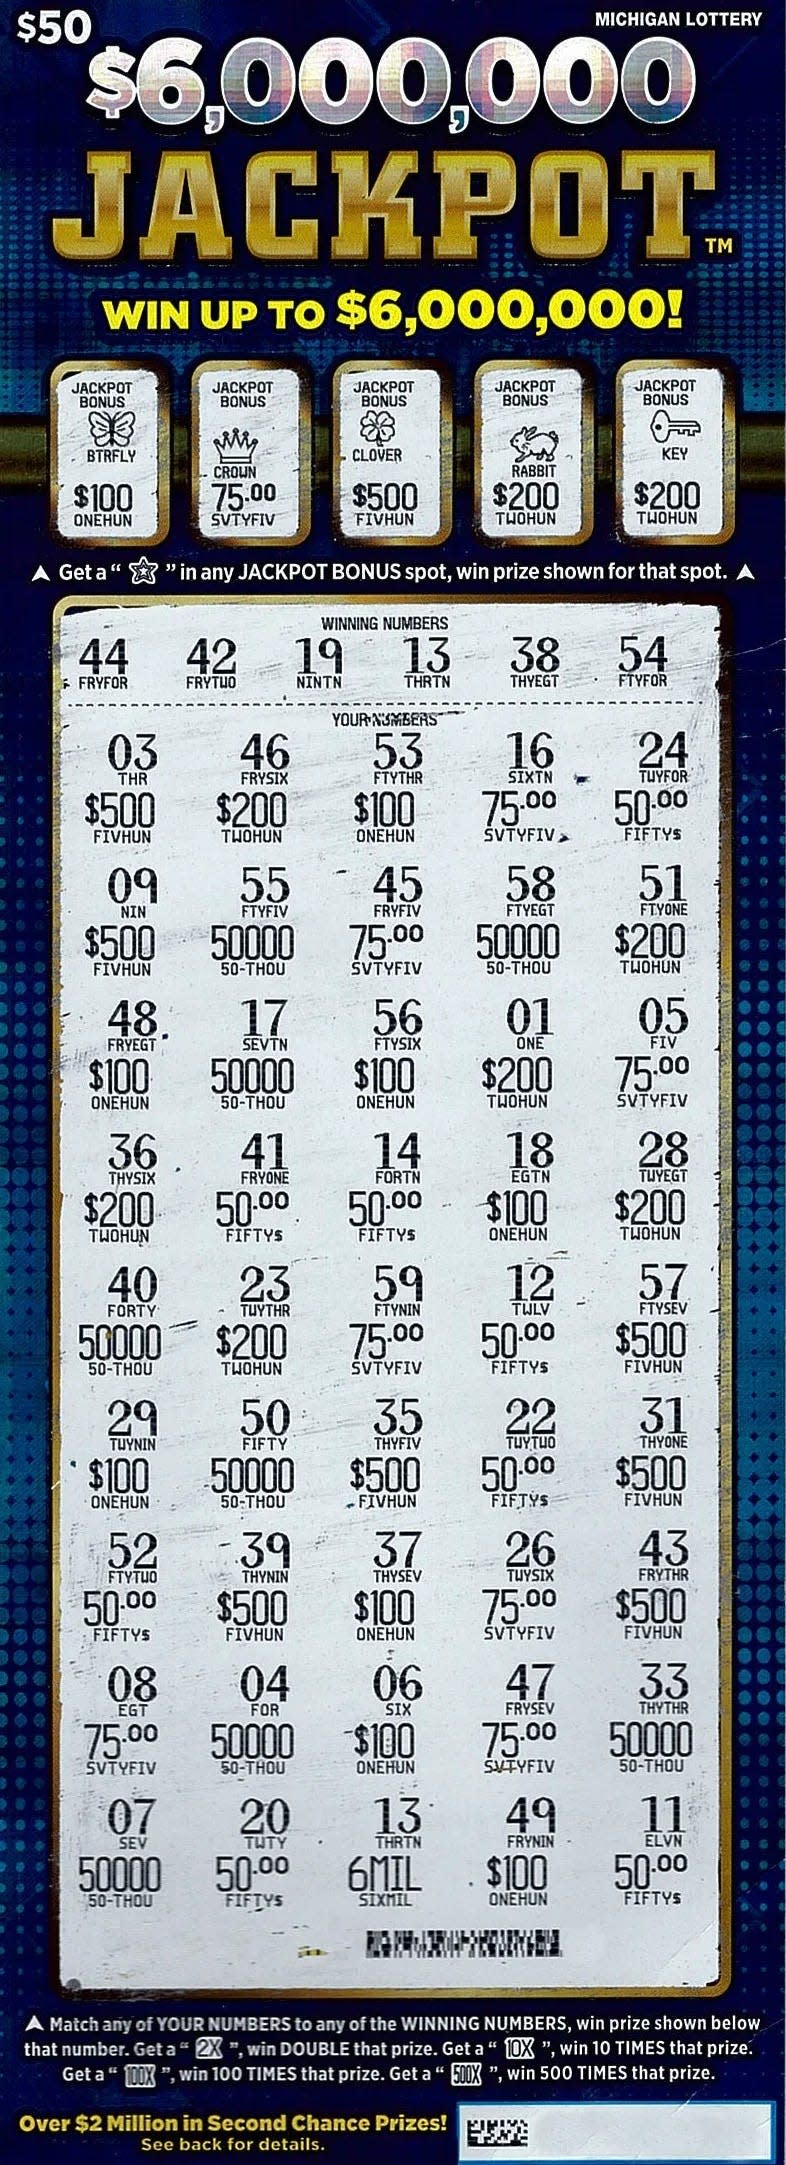 An Alpena County woman recently won $6,000,000 on a $6,000,000 Jackpot instant Michigan Lottery ticket.